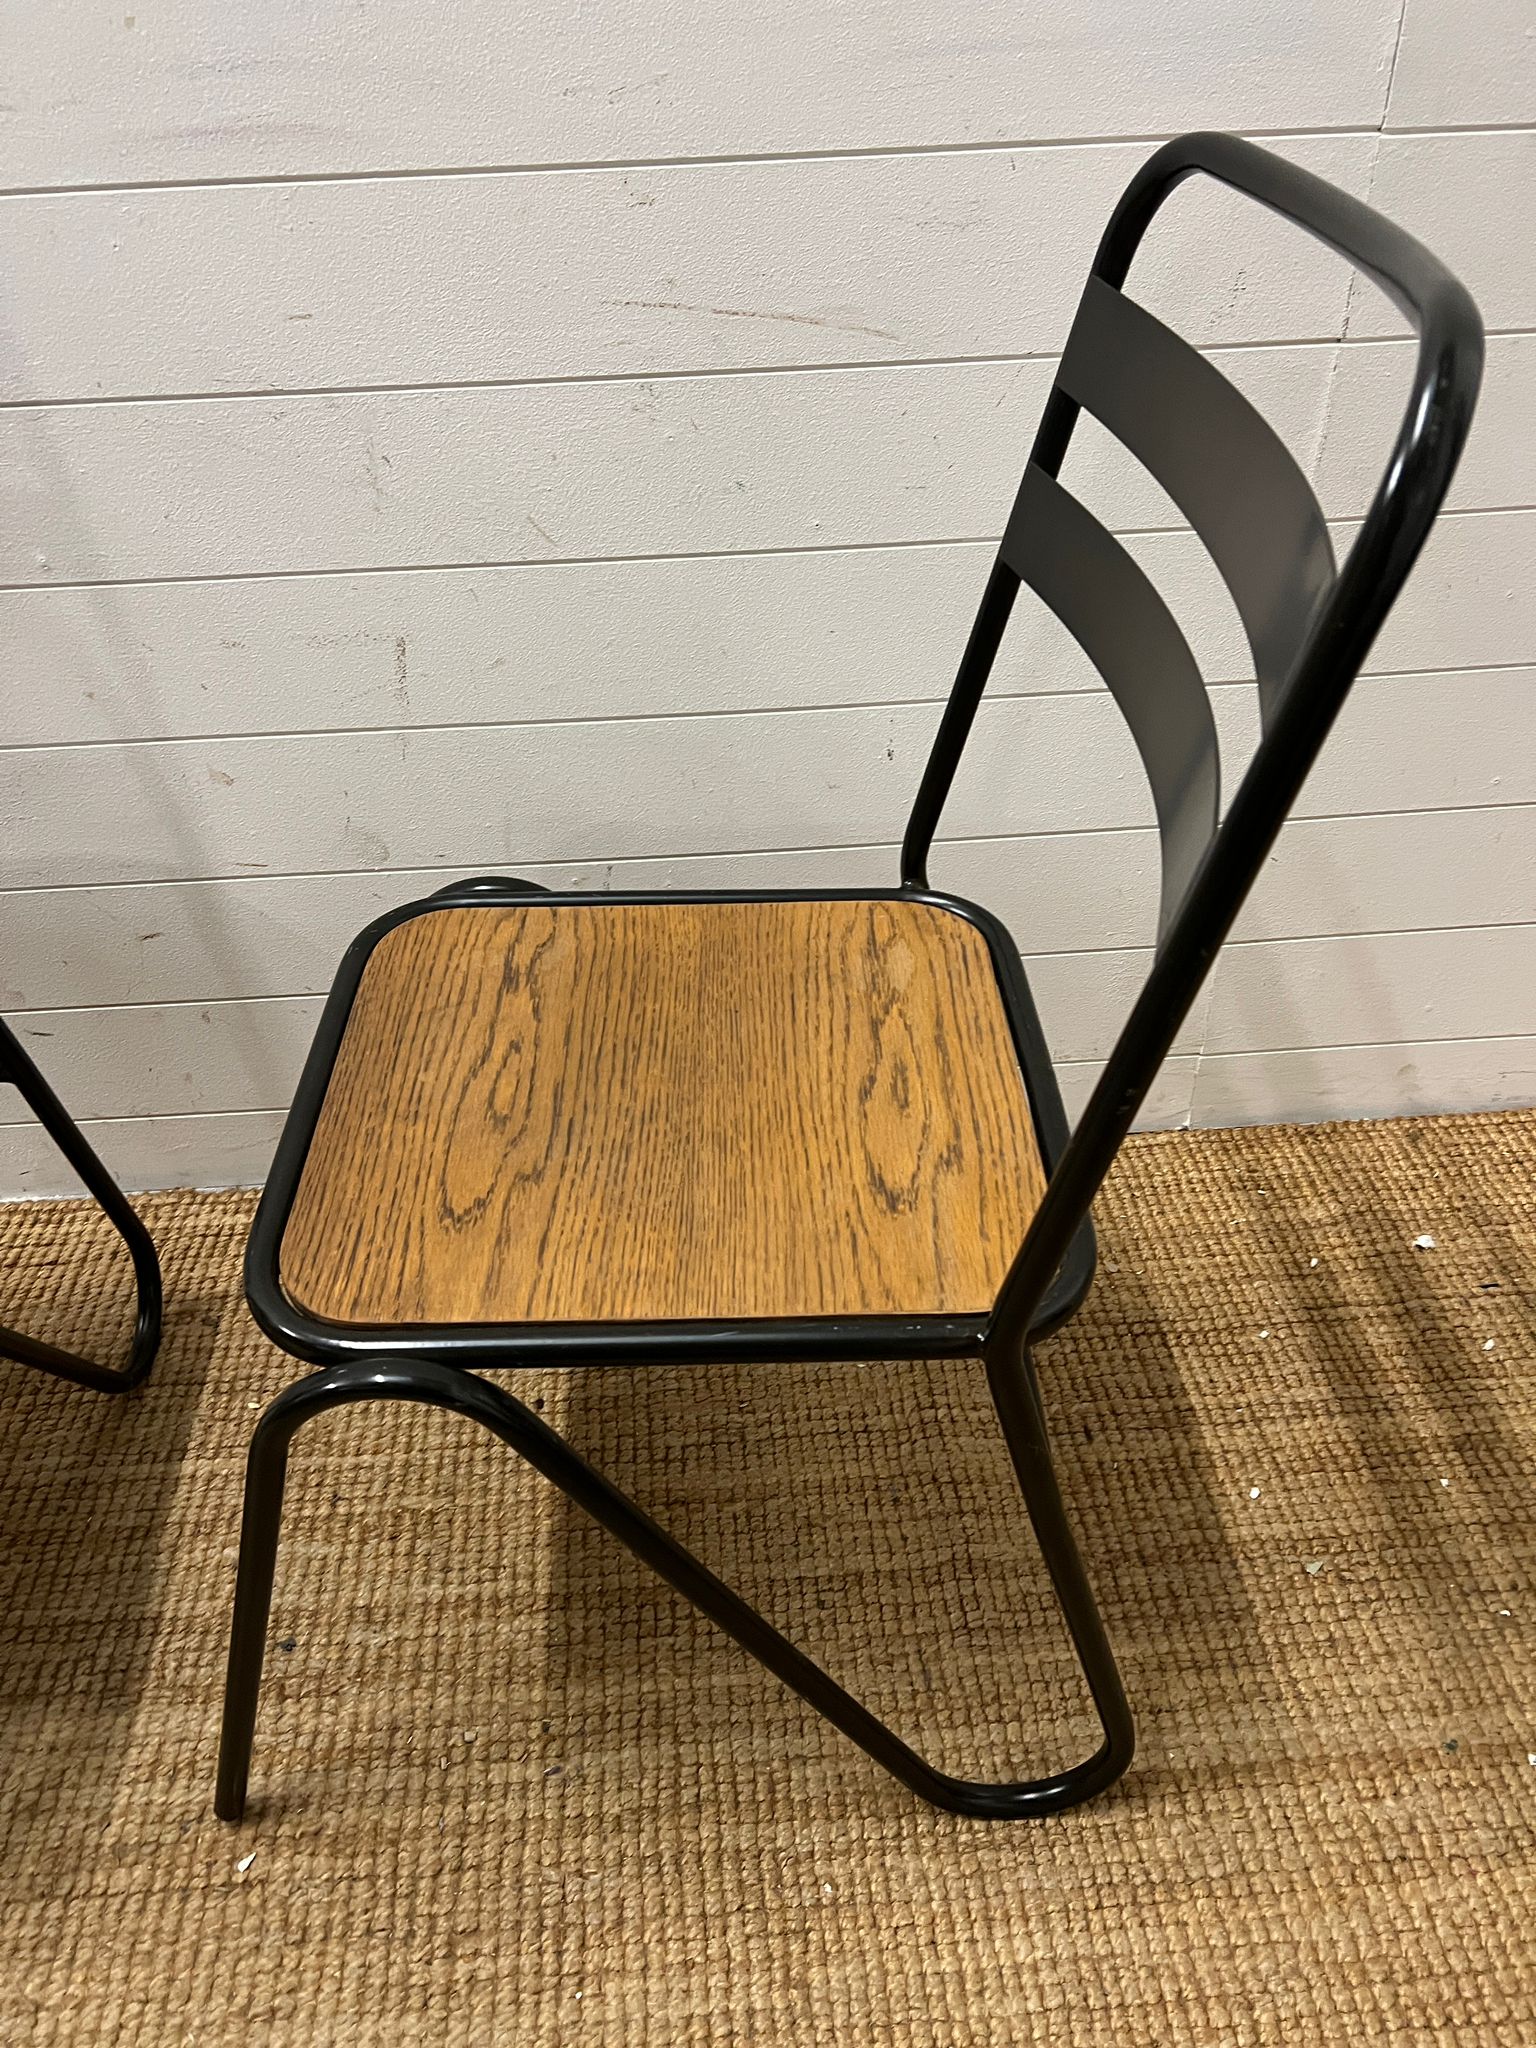 A pair of contemporary industrial style sacking chairs with wooden seat and metal hair pin style - Image 3 of 5